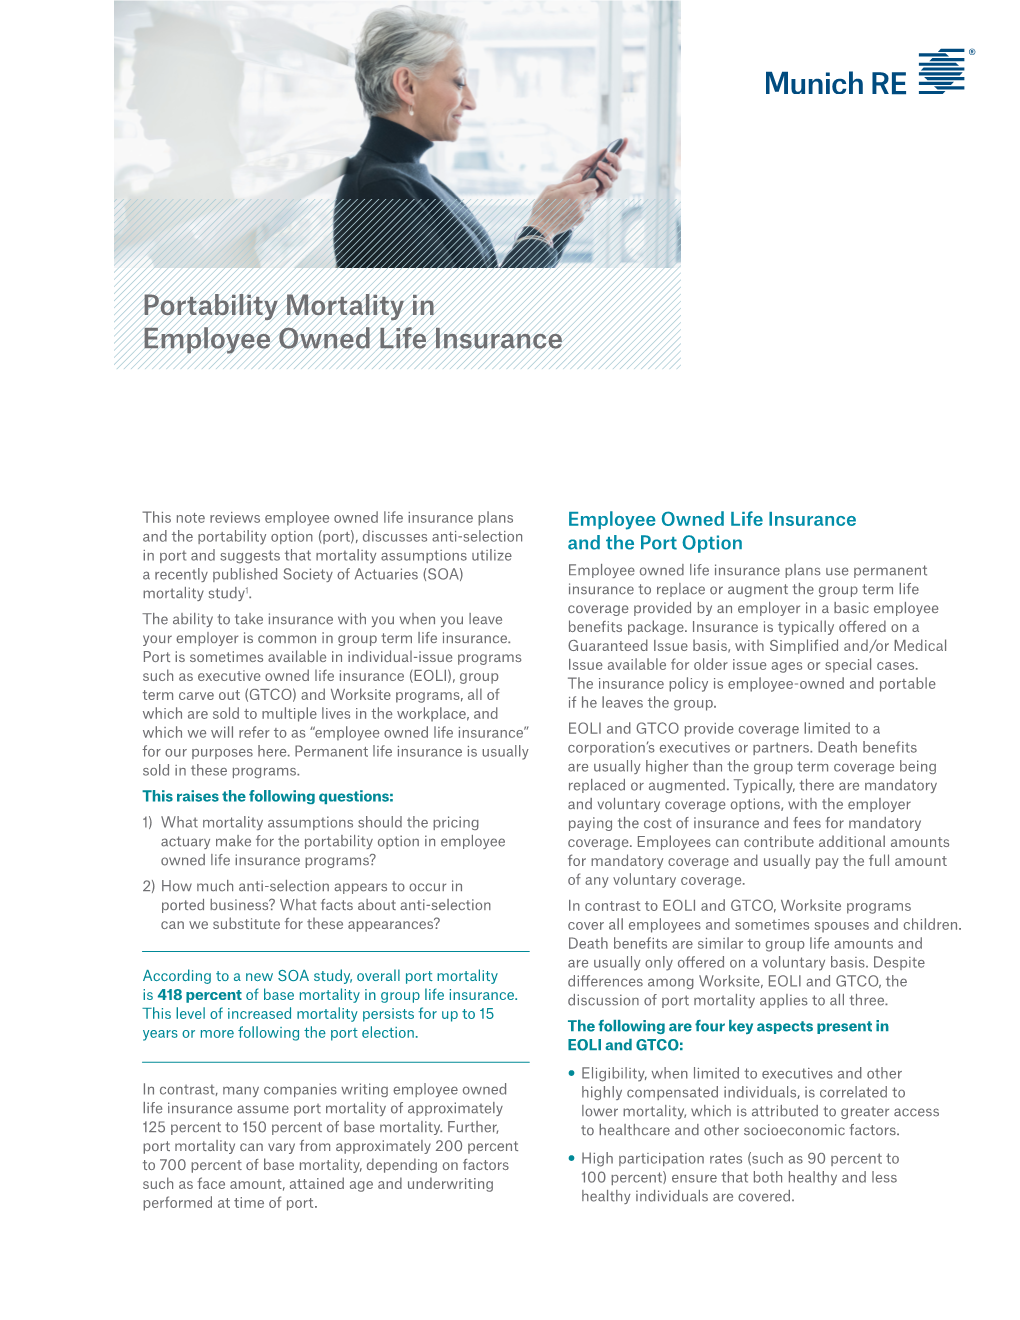 Portability Mortality in Employee Owned Life Insurance